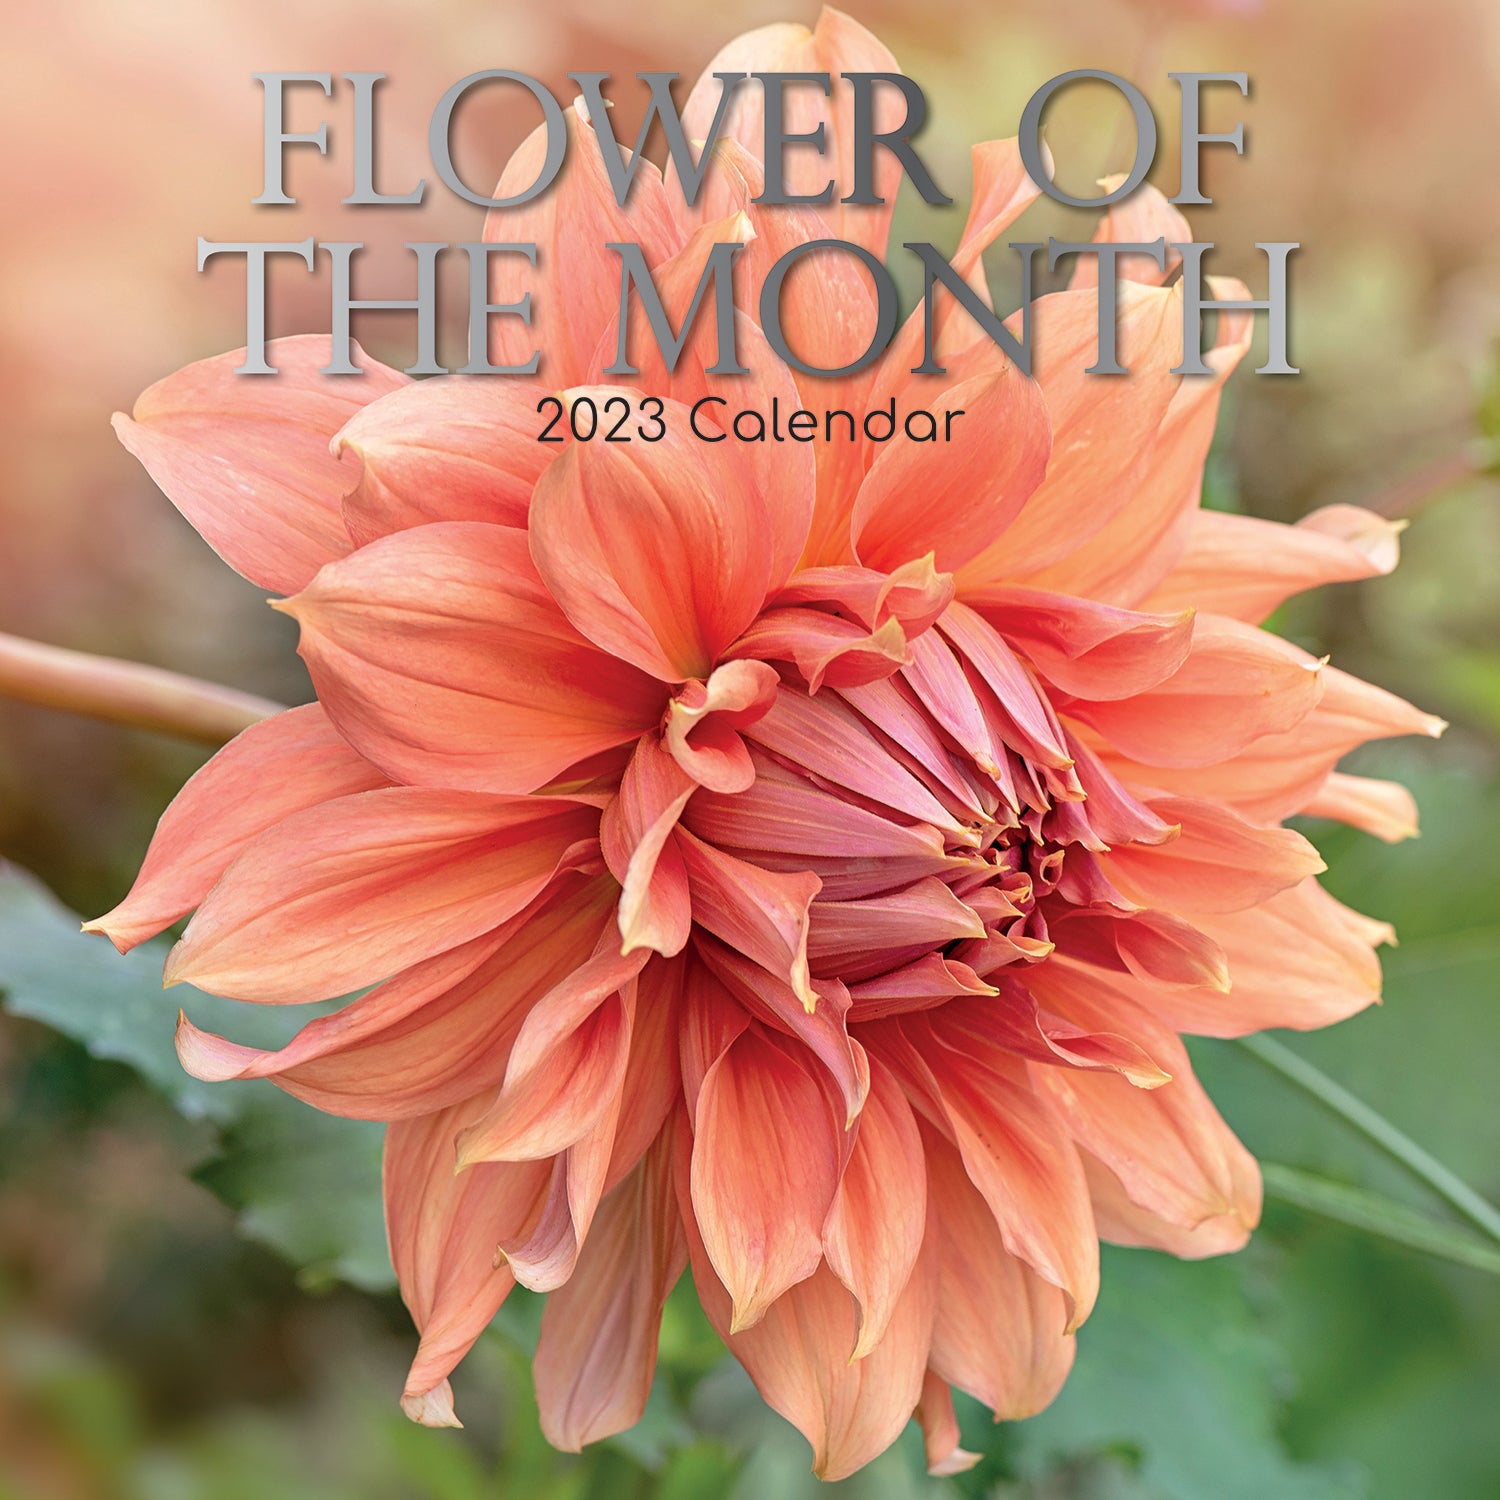 Flower of the Month - 2023 Square Wall Calendar 16 Months Floral Planner Gift - Zmart Australia